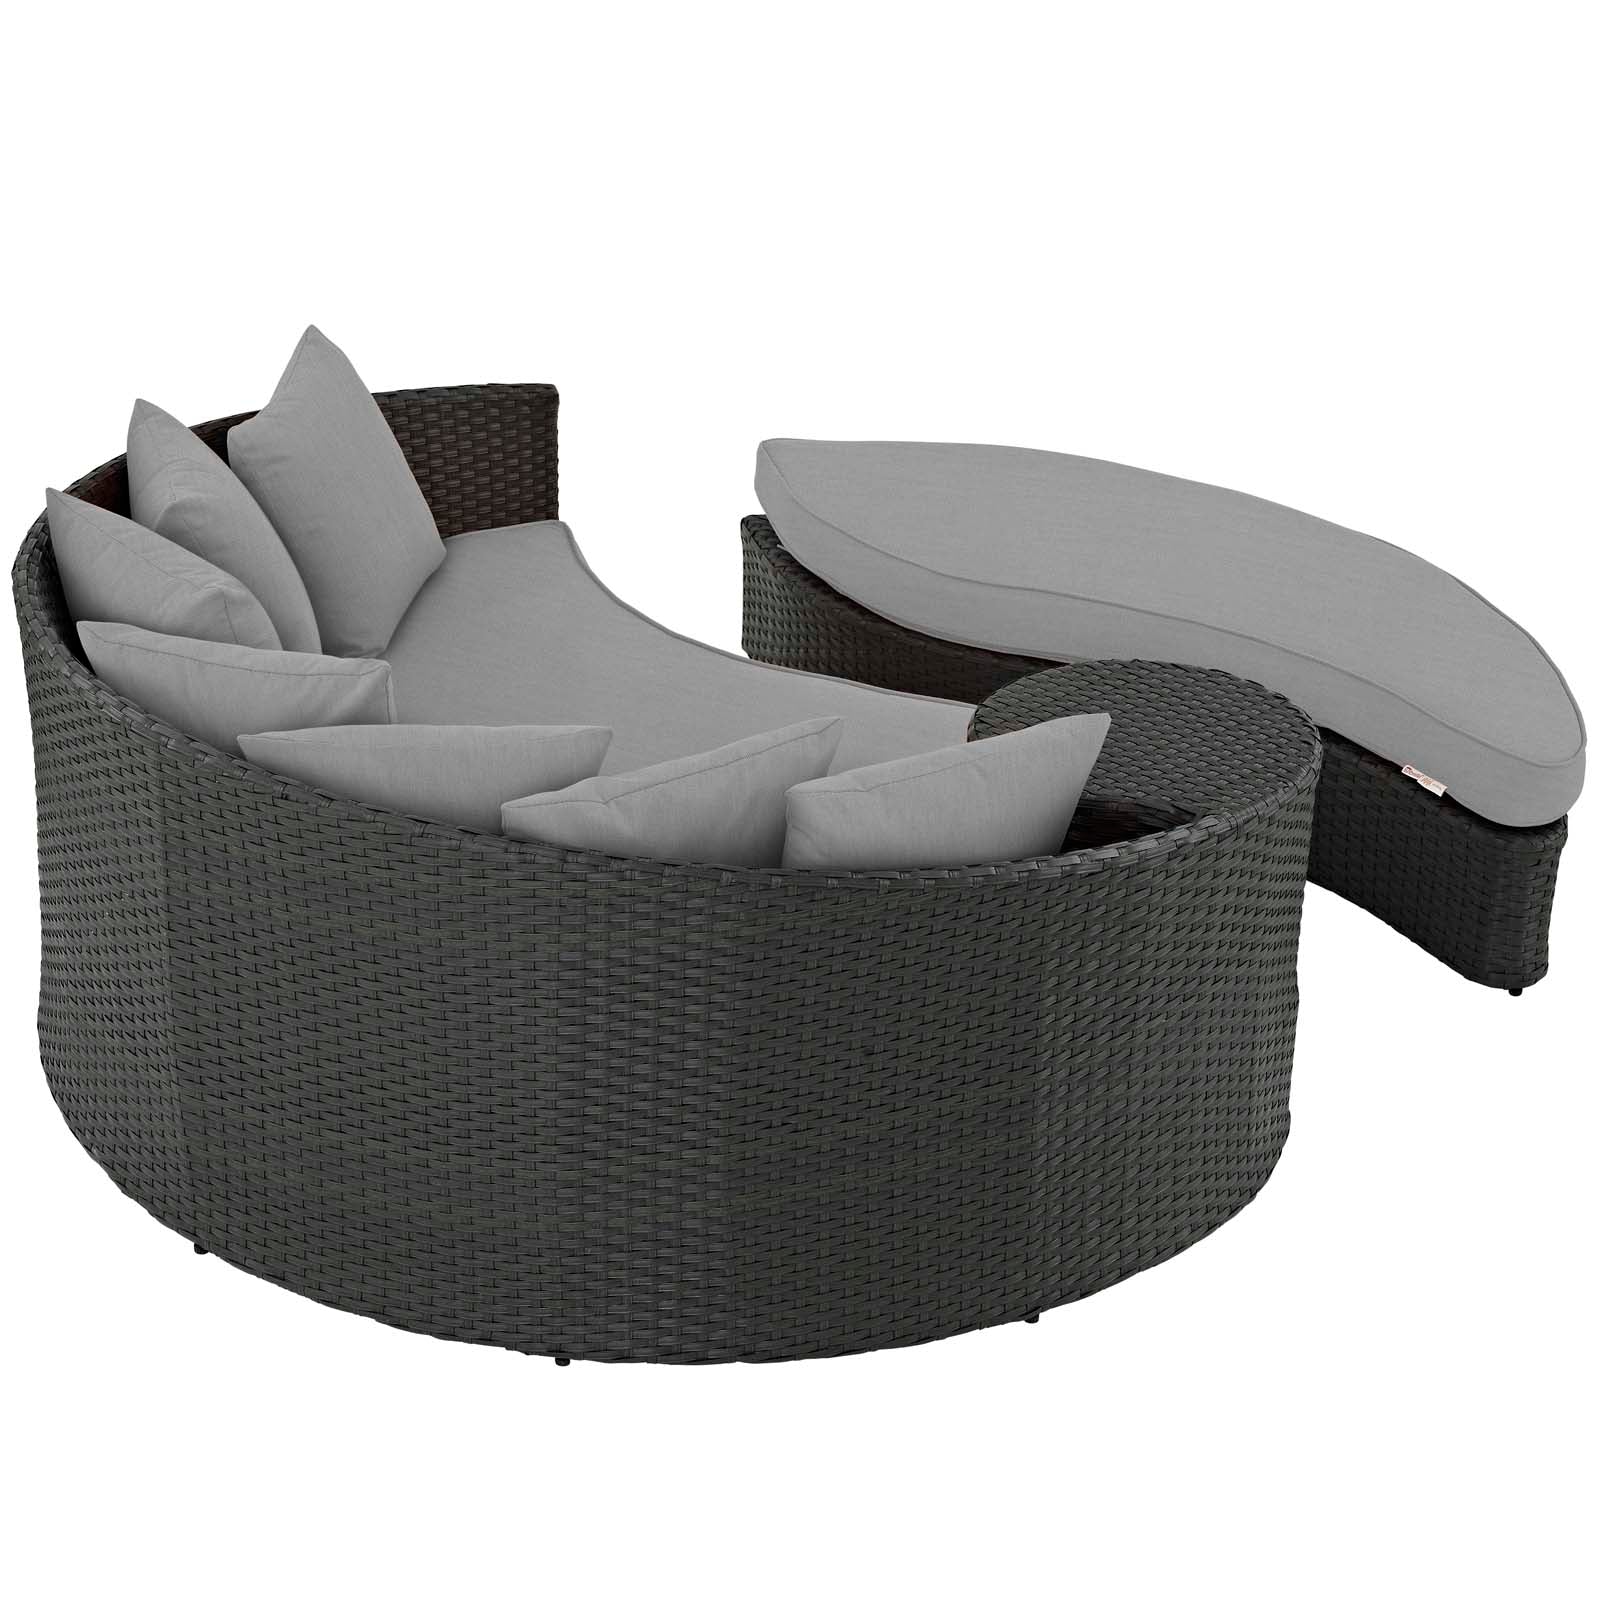 Modway Patio Daybeds - Sojourn Outdoor Patio Sunbrella 71"W Daybed Canvas Gray